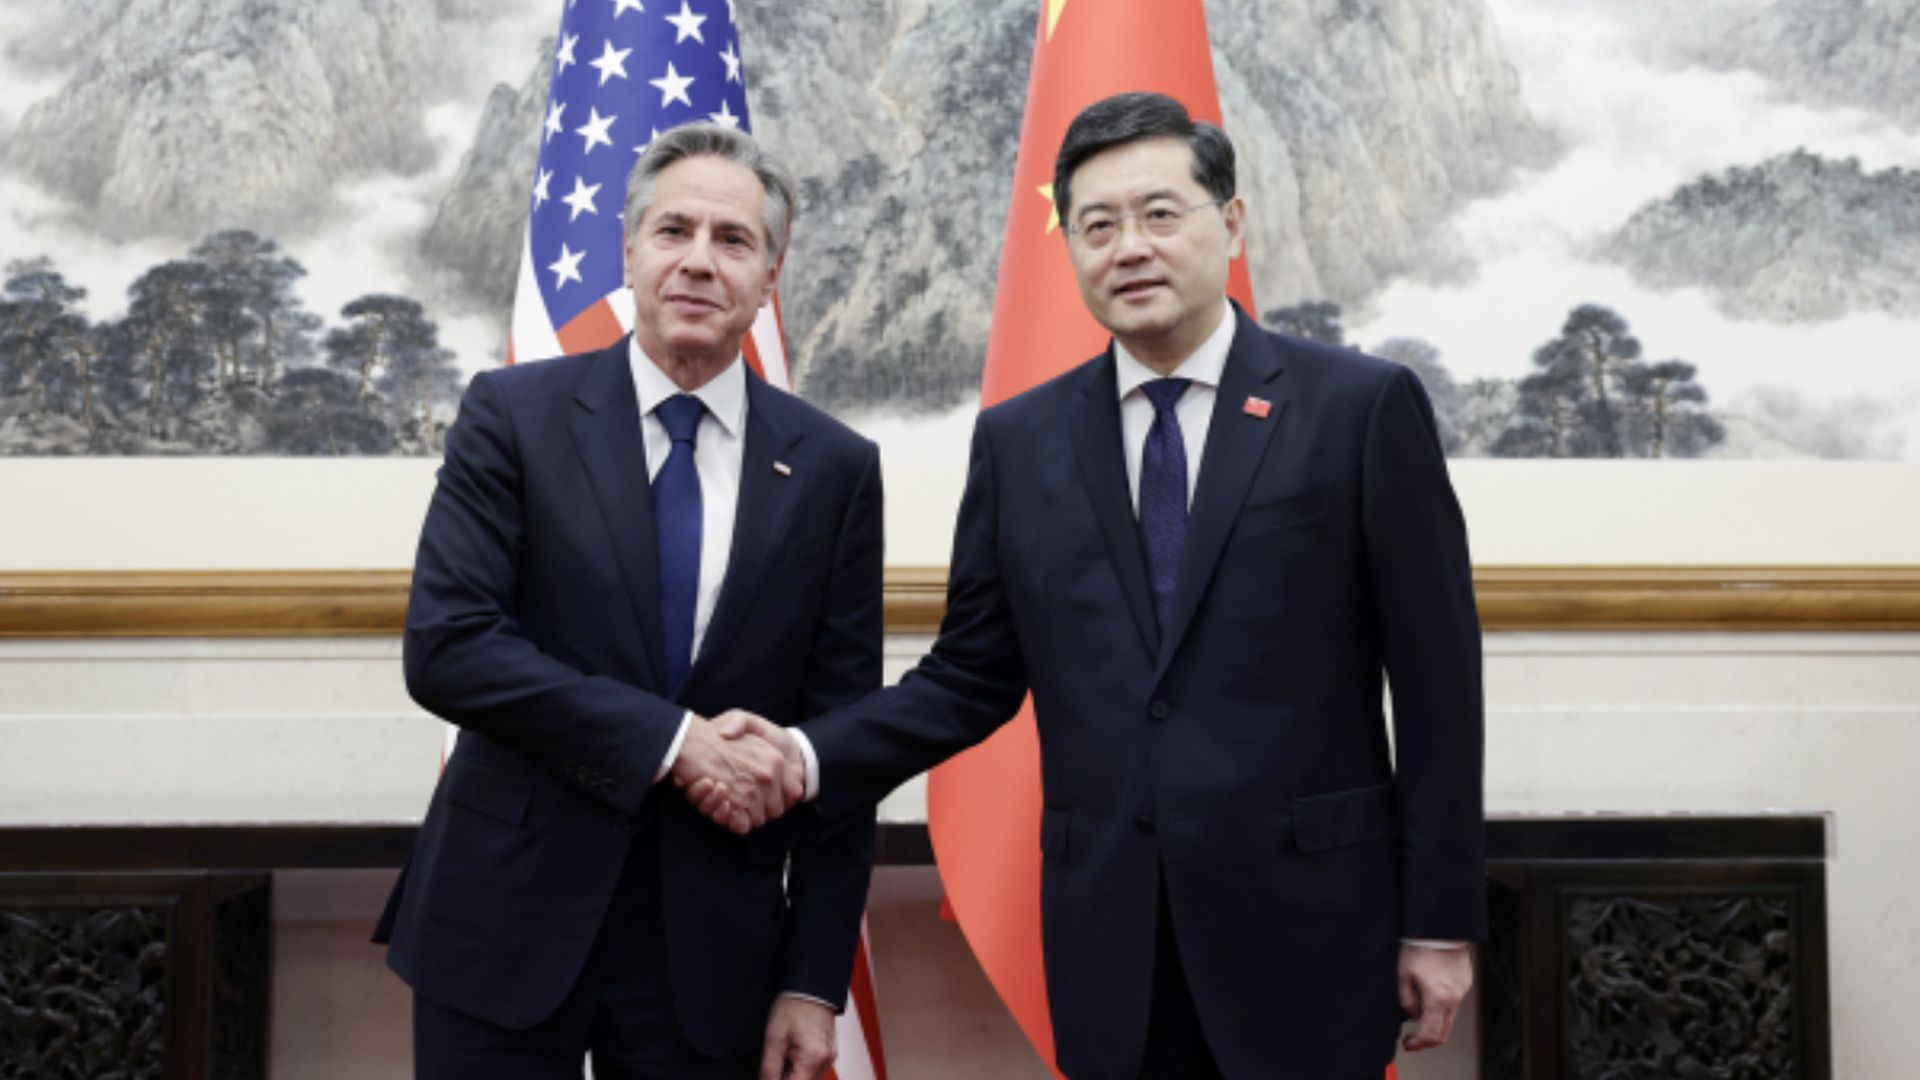 Chinese foreign minister Qin Gang meets with U.S. Secretary of State Antony Blinken